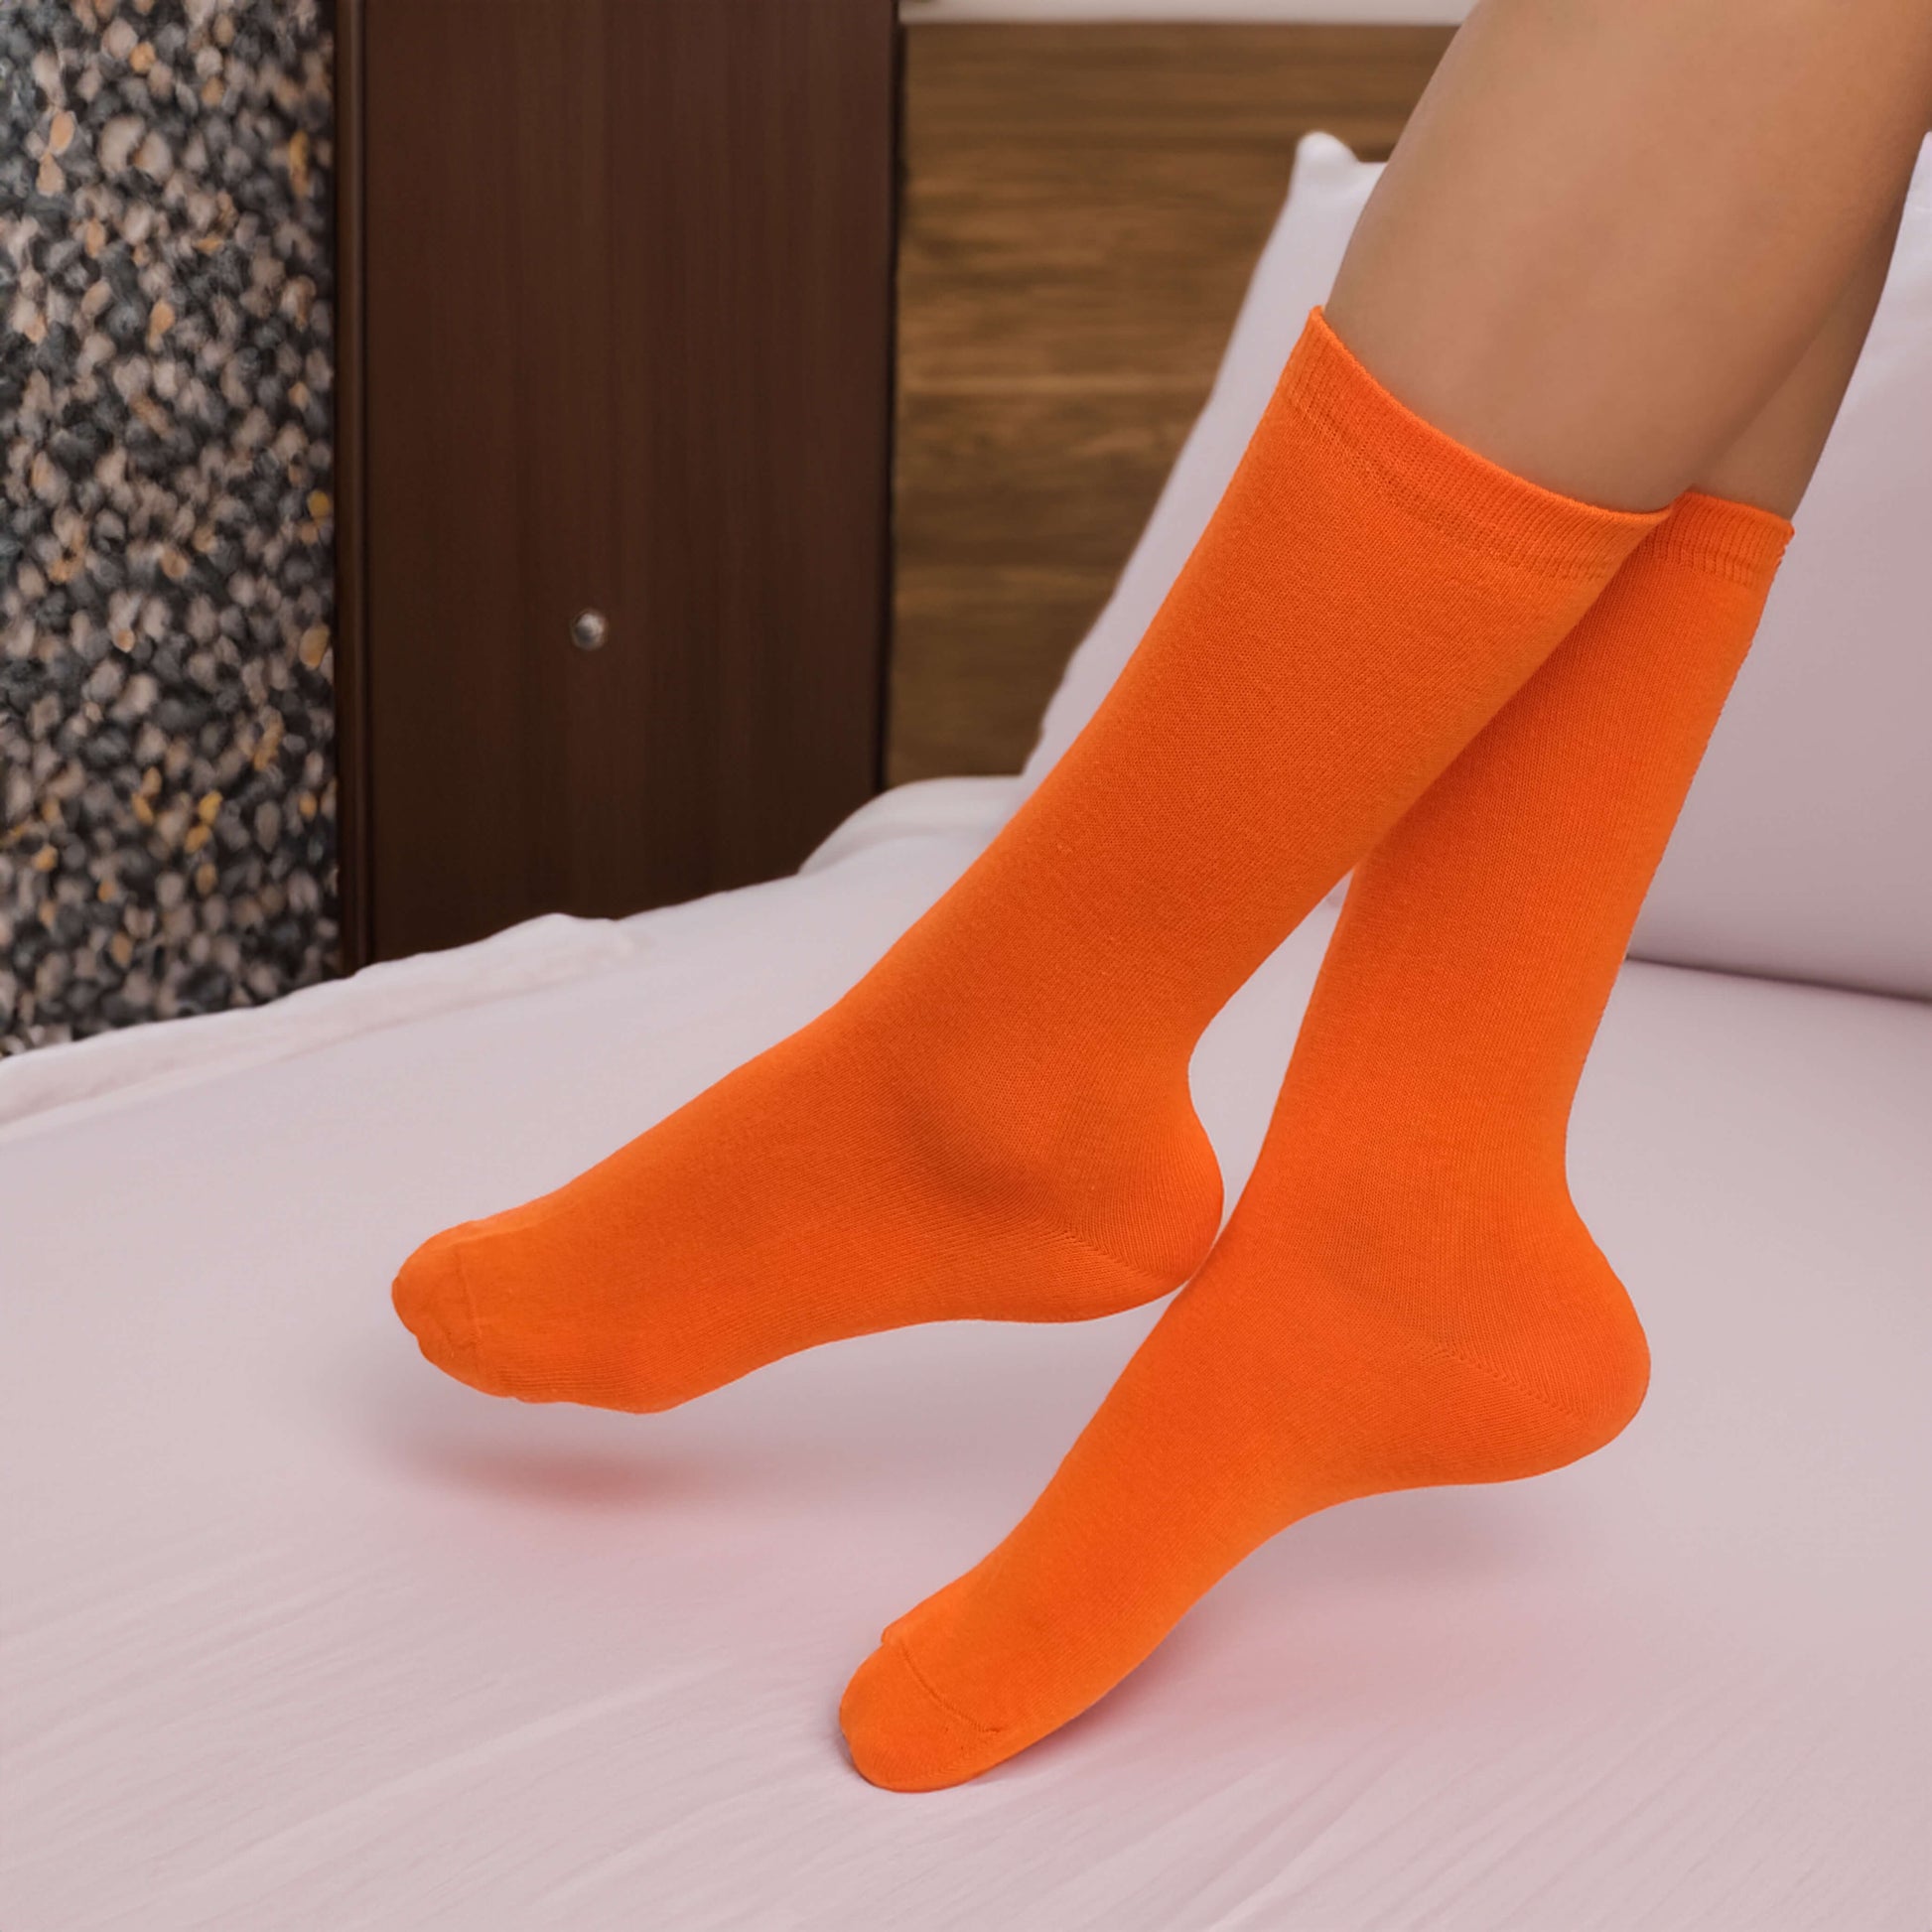 Pack of six comfortable cotton socks with solid patterns in vibrant colors such as navy blue, red, green, yellow, purple, and pink. Elevate your sock game with this colorful set.